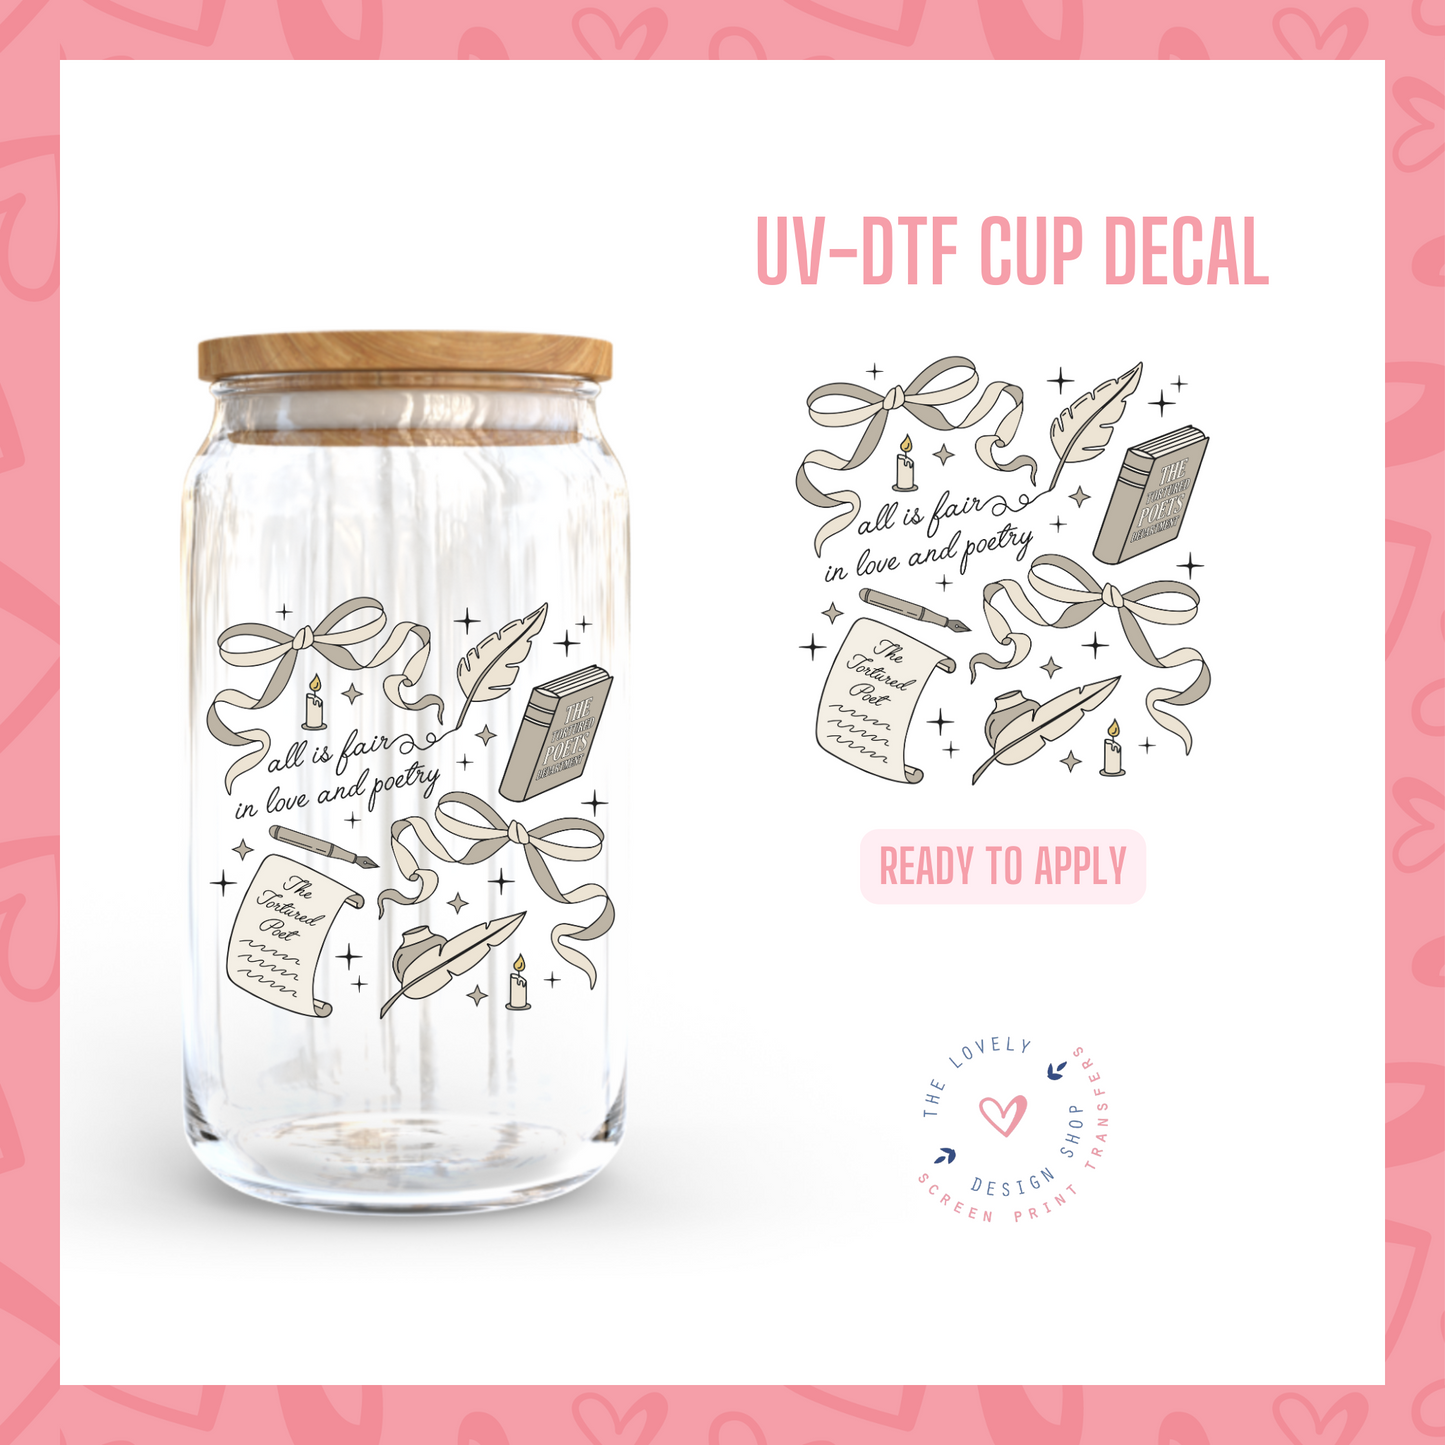 Poets - UV DTF Cup Decal (Ready to Ship) May 13